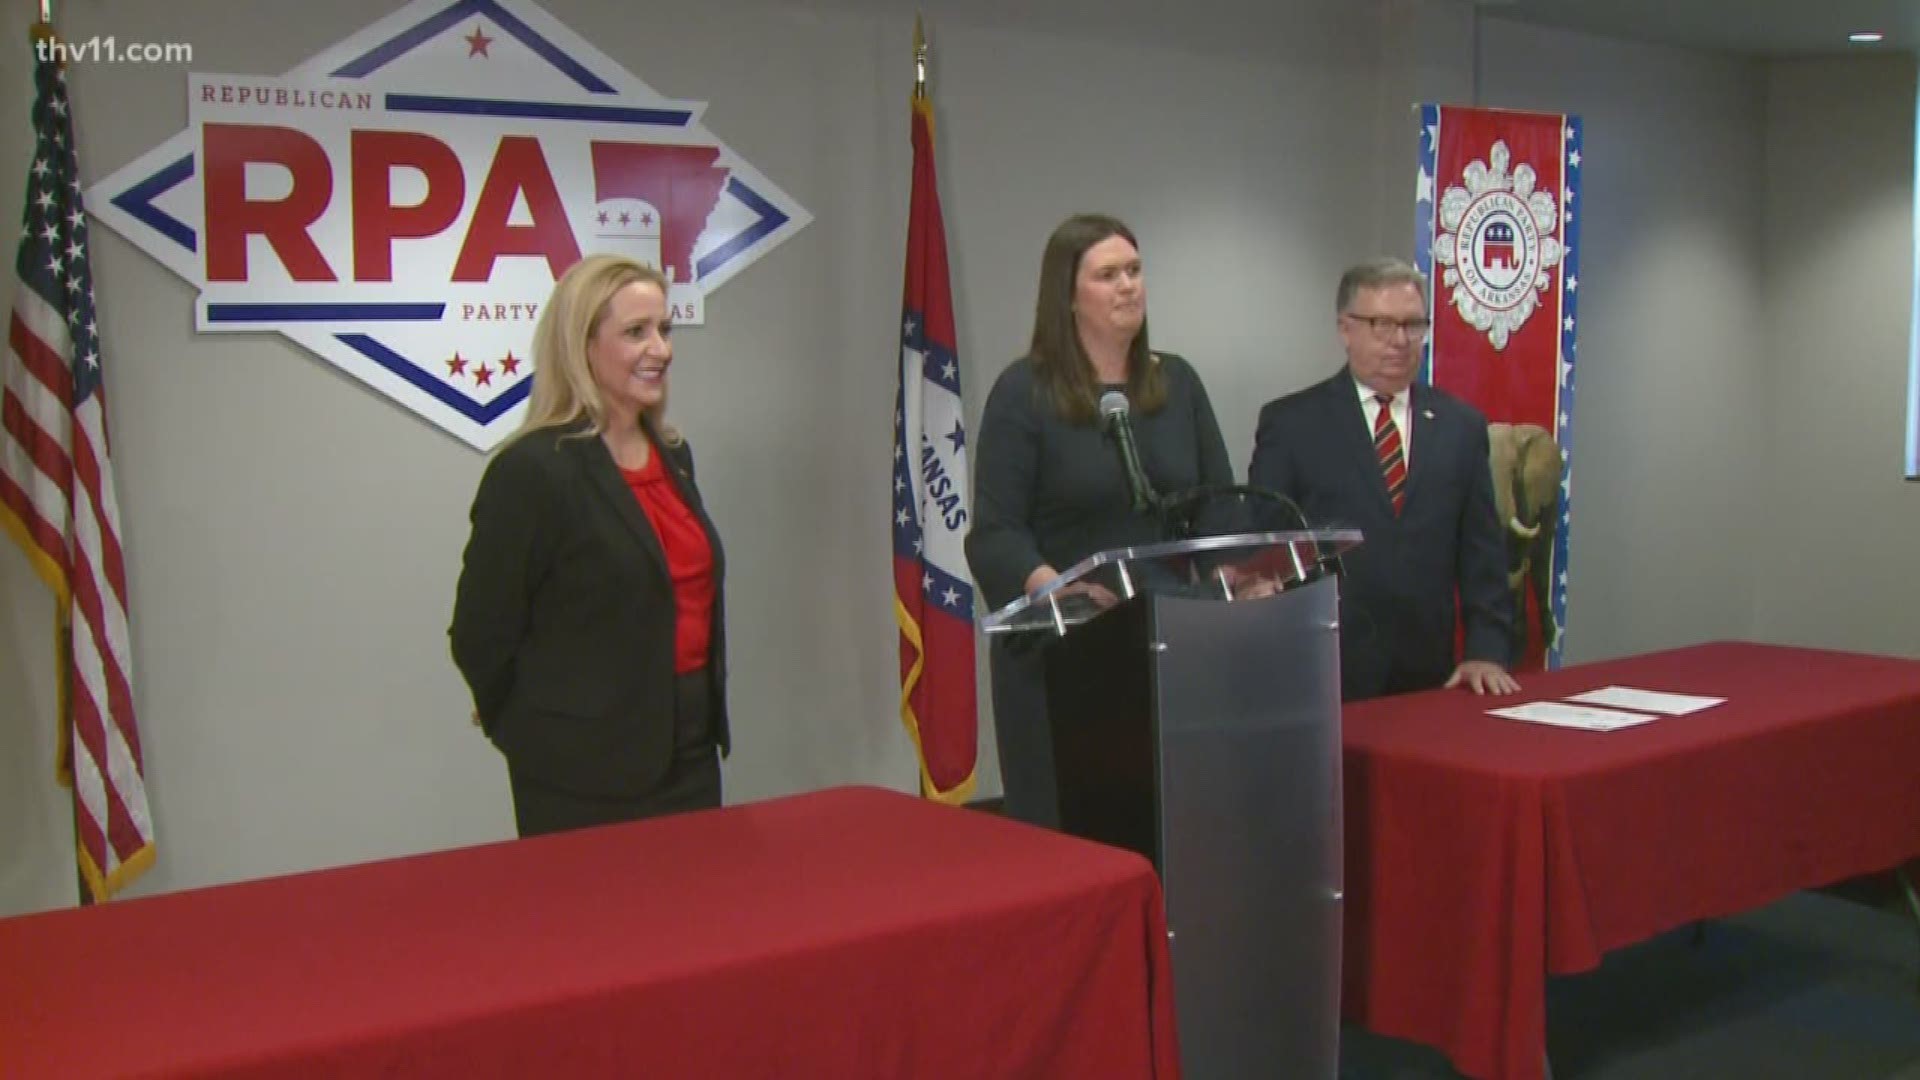 State Attorney General Leslie Rutledge and former White House Press Secretary Sarah Sanders present Trump's re-election campaign in Arkansas.